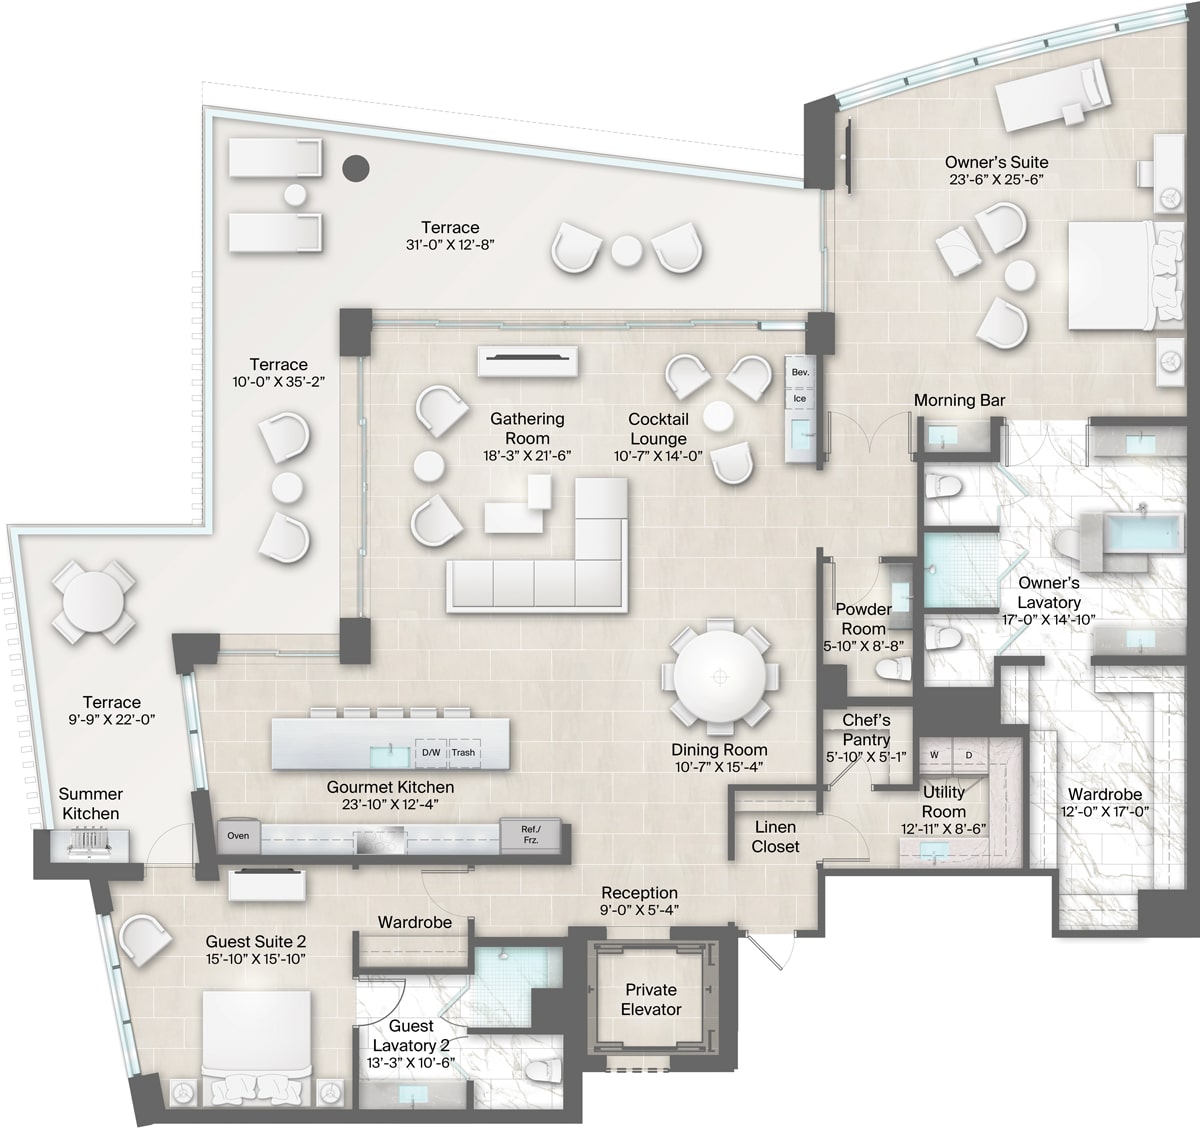 Champagne Building, Plan 10 & 11 Floorplan includes 2 bedrooms, 2.5 baths and terrace